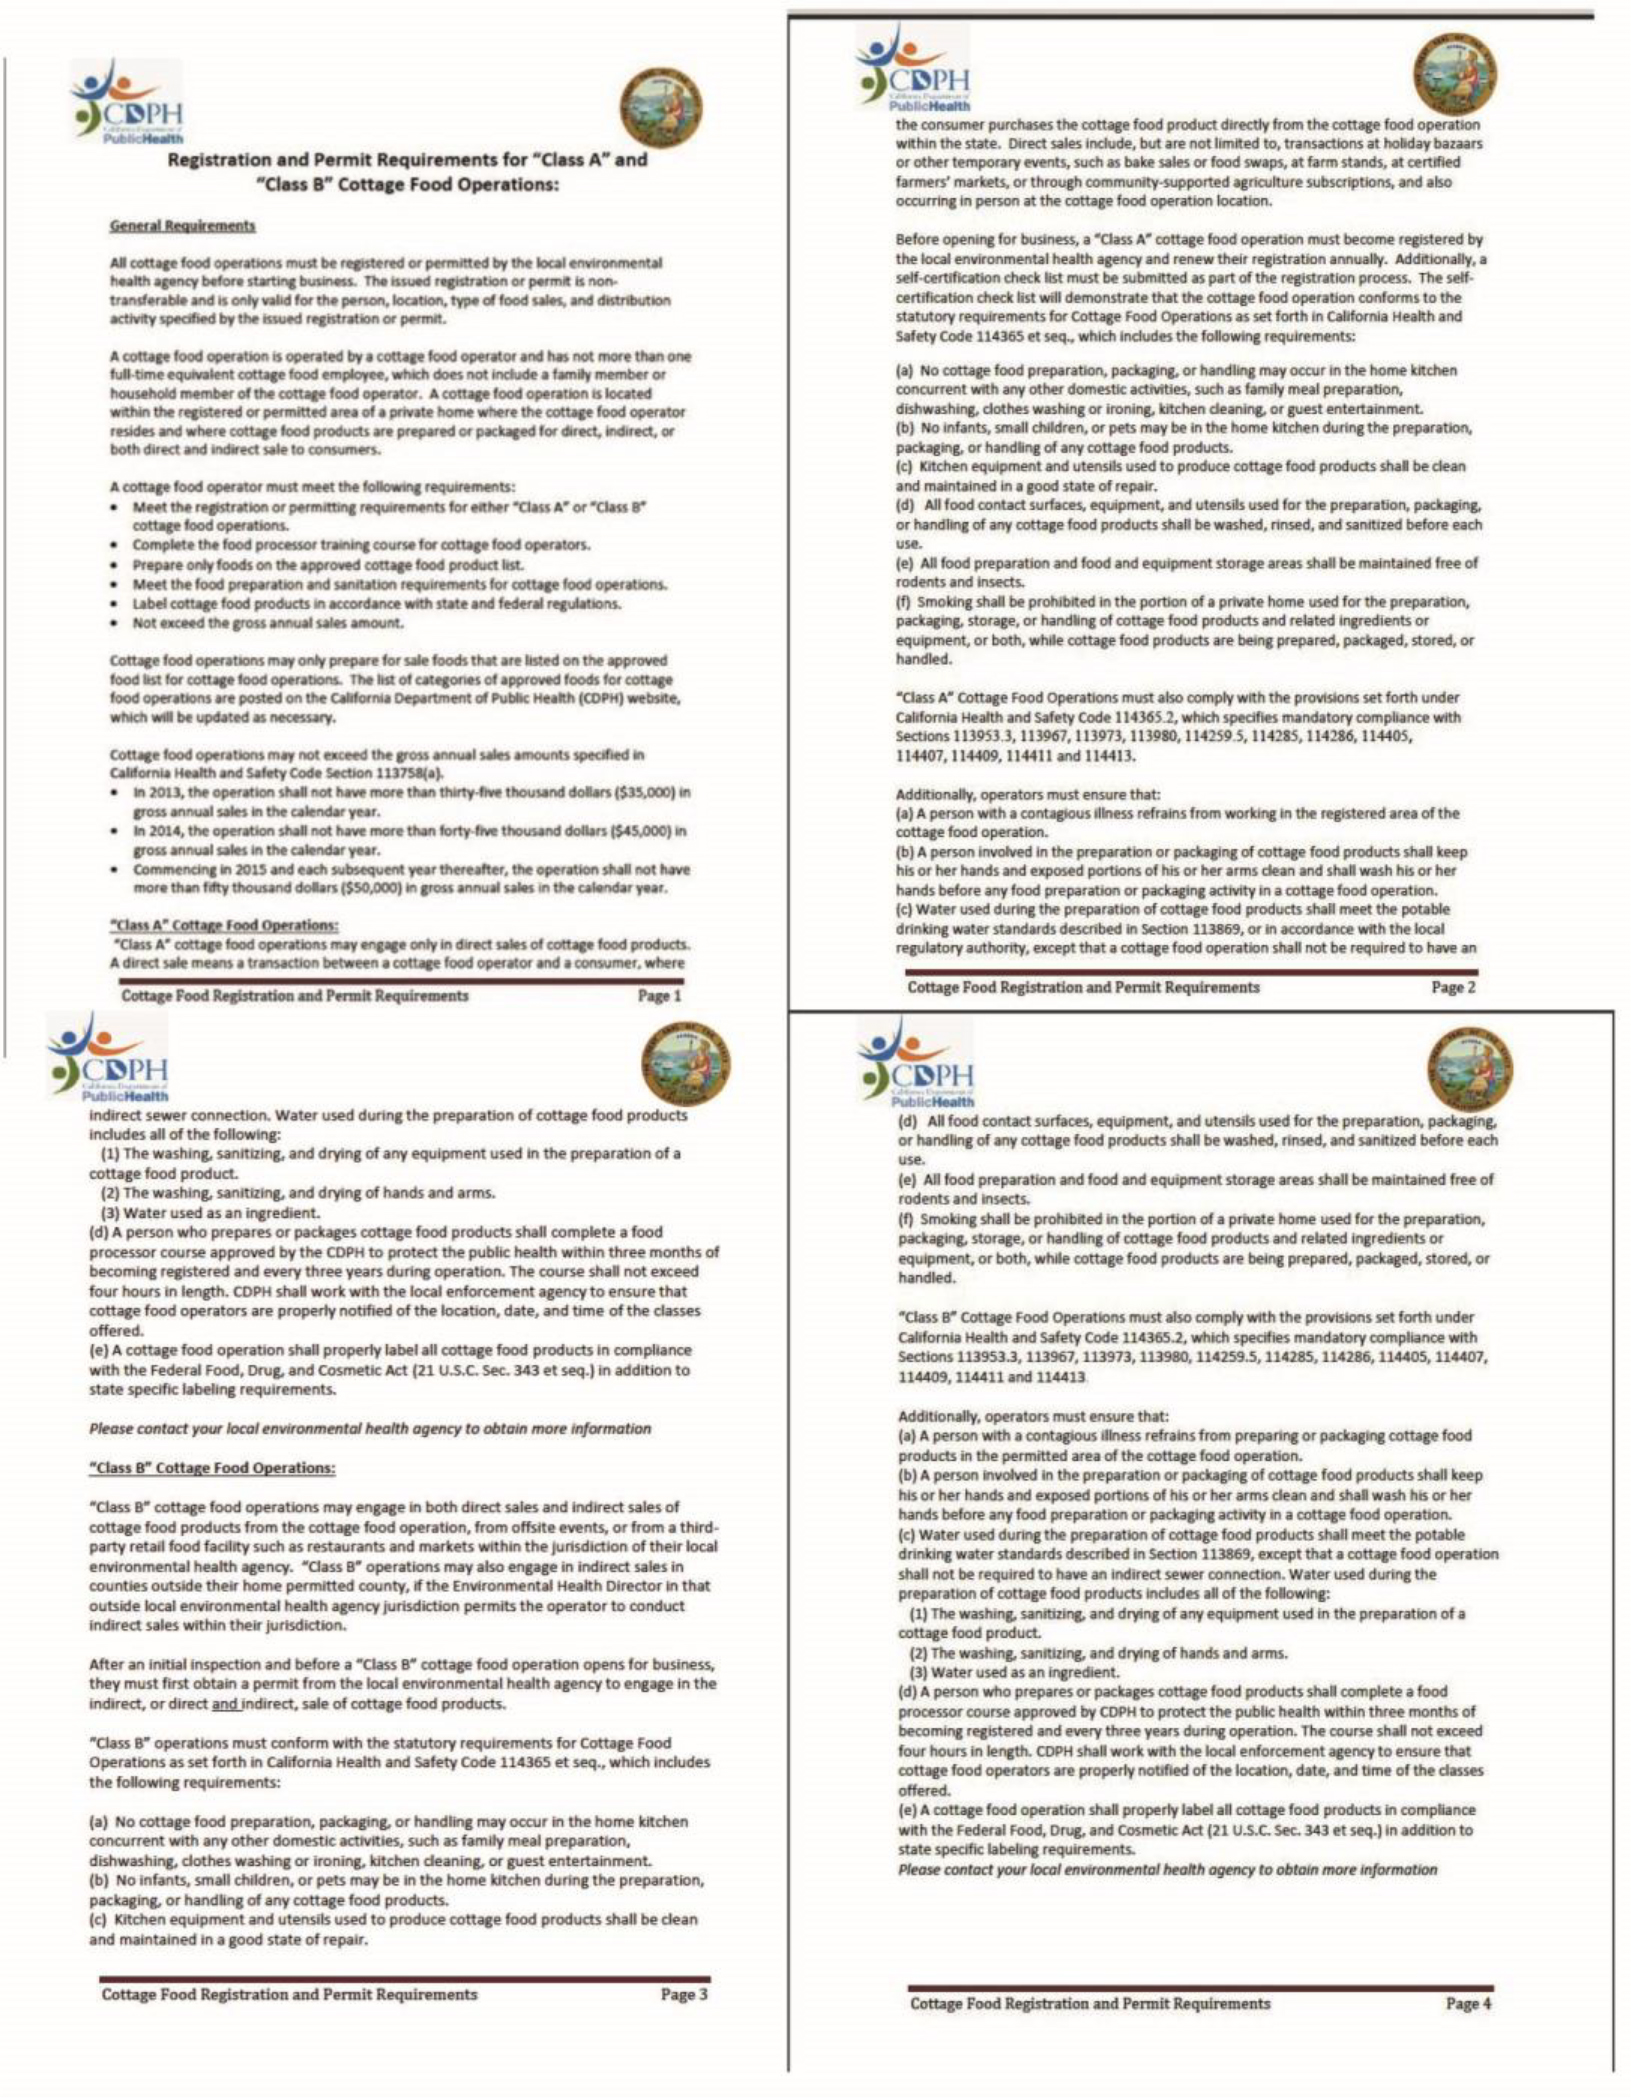 An image shows four pages of registration and permit requirements for class A and Class B cottage food operations by Department of Public Health in California.